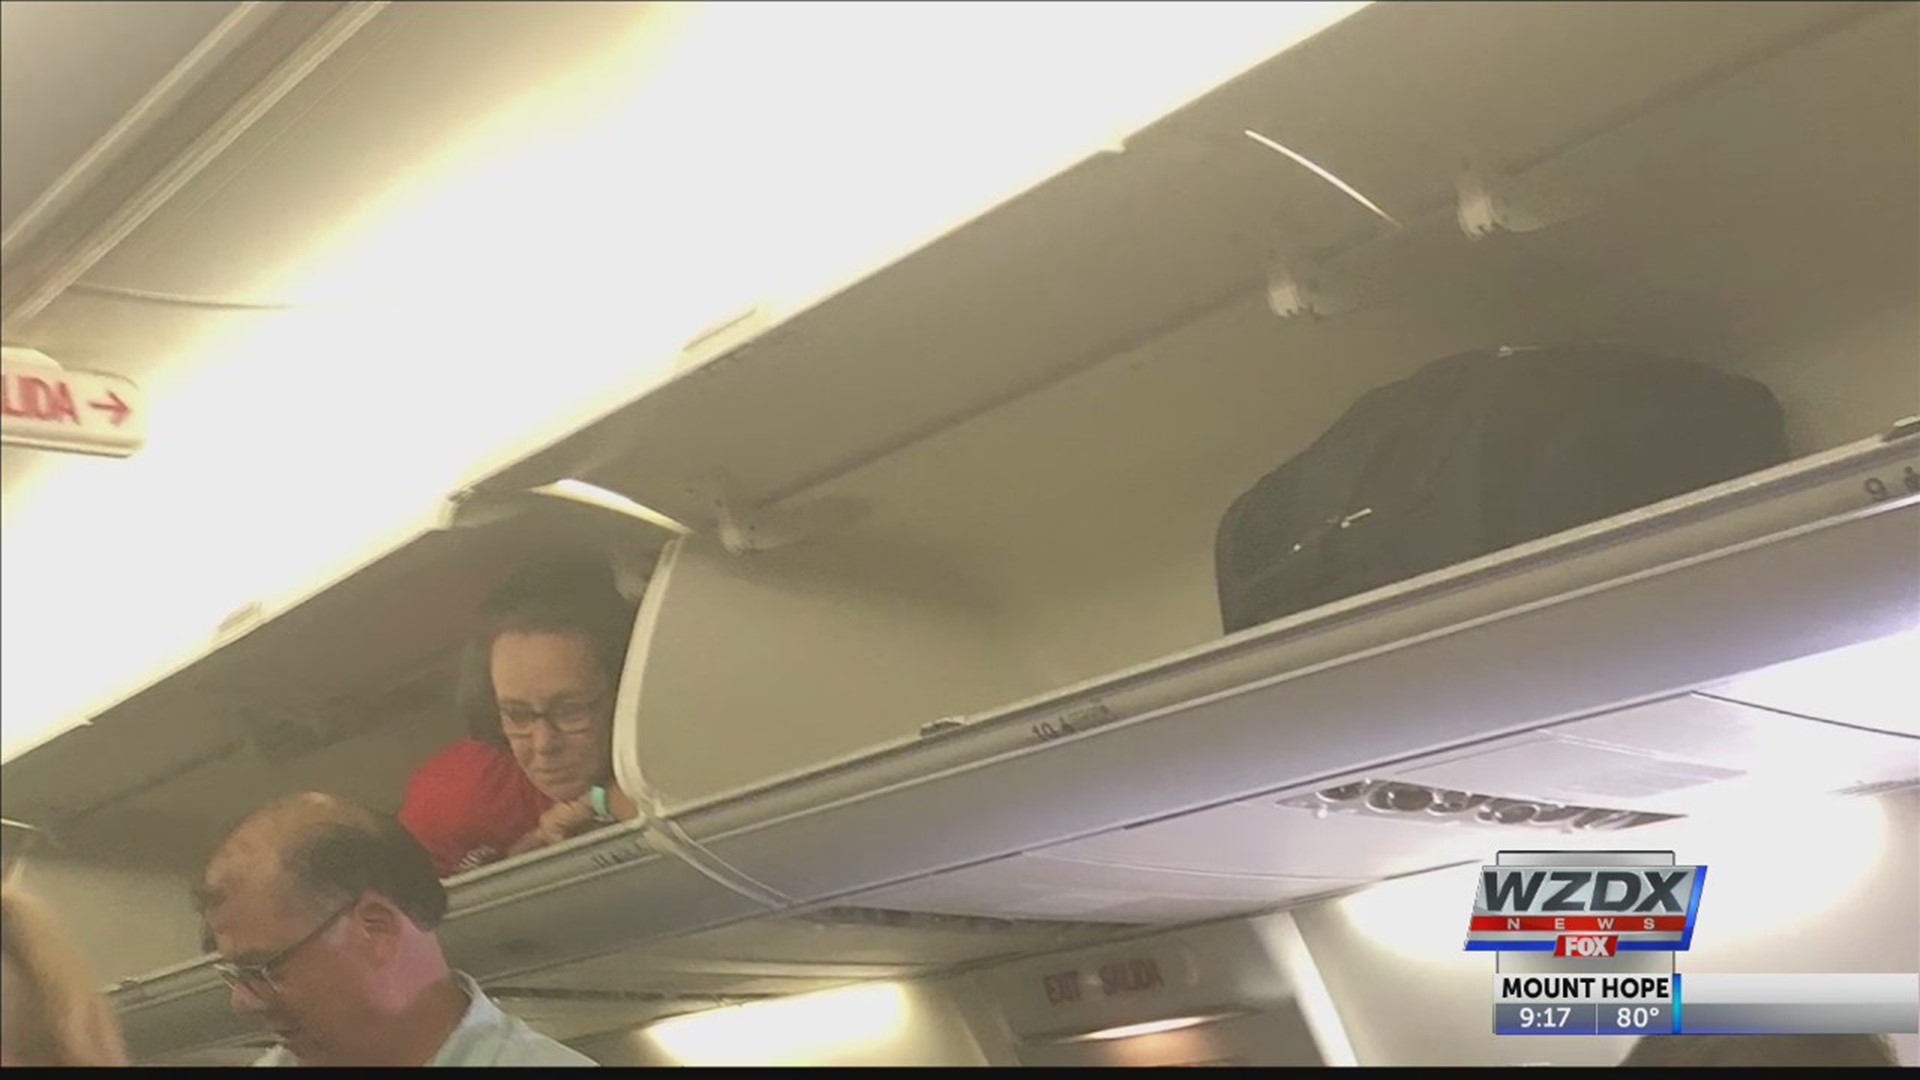 Passengers on a Southwest Airlines flight were surprised when they saw one of their flight attendants greeting them from the comfort of the overhead bin.